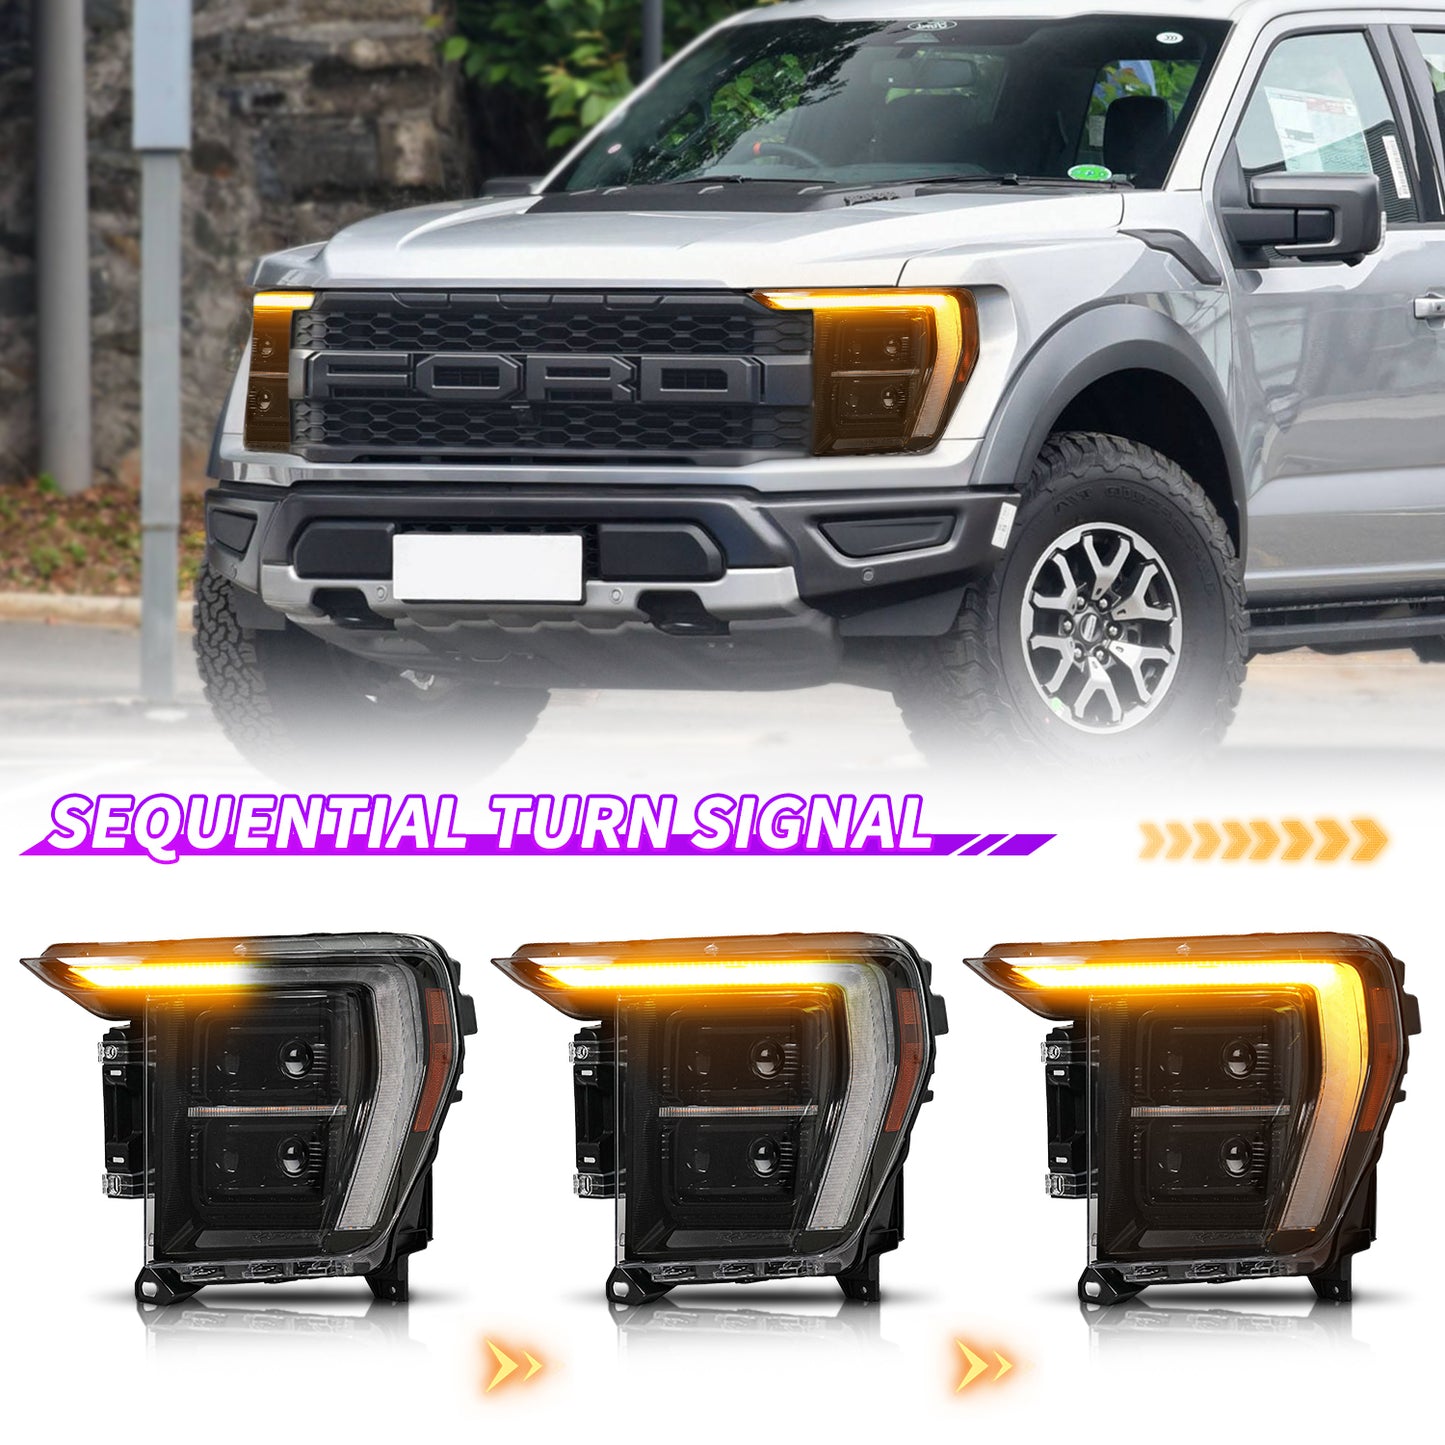 Full LED Headlights Assembly For Ford F-150 Raptor 2021+, F DRL Style